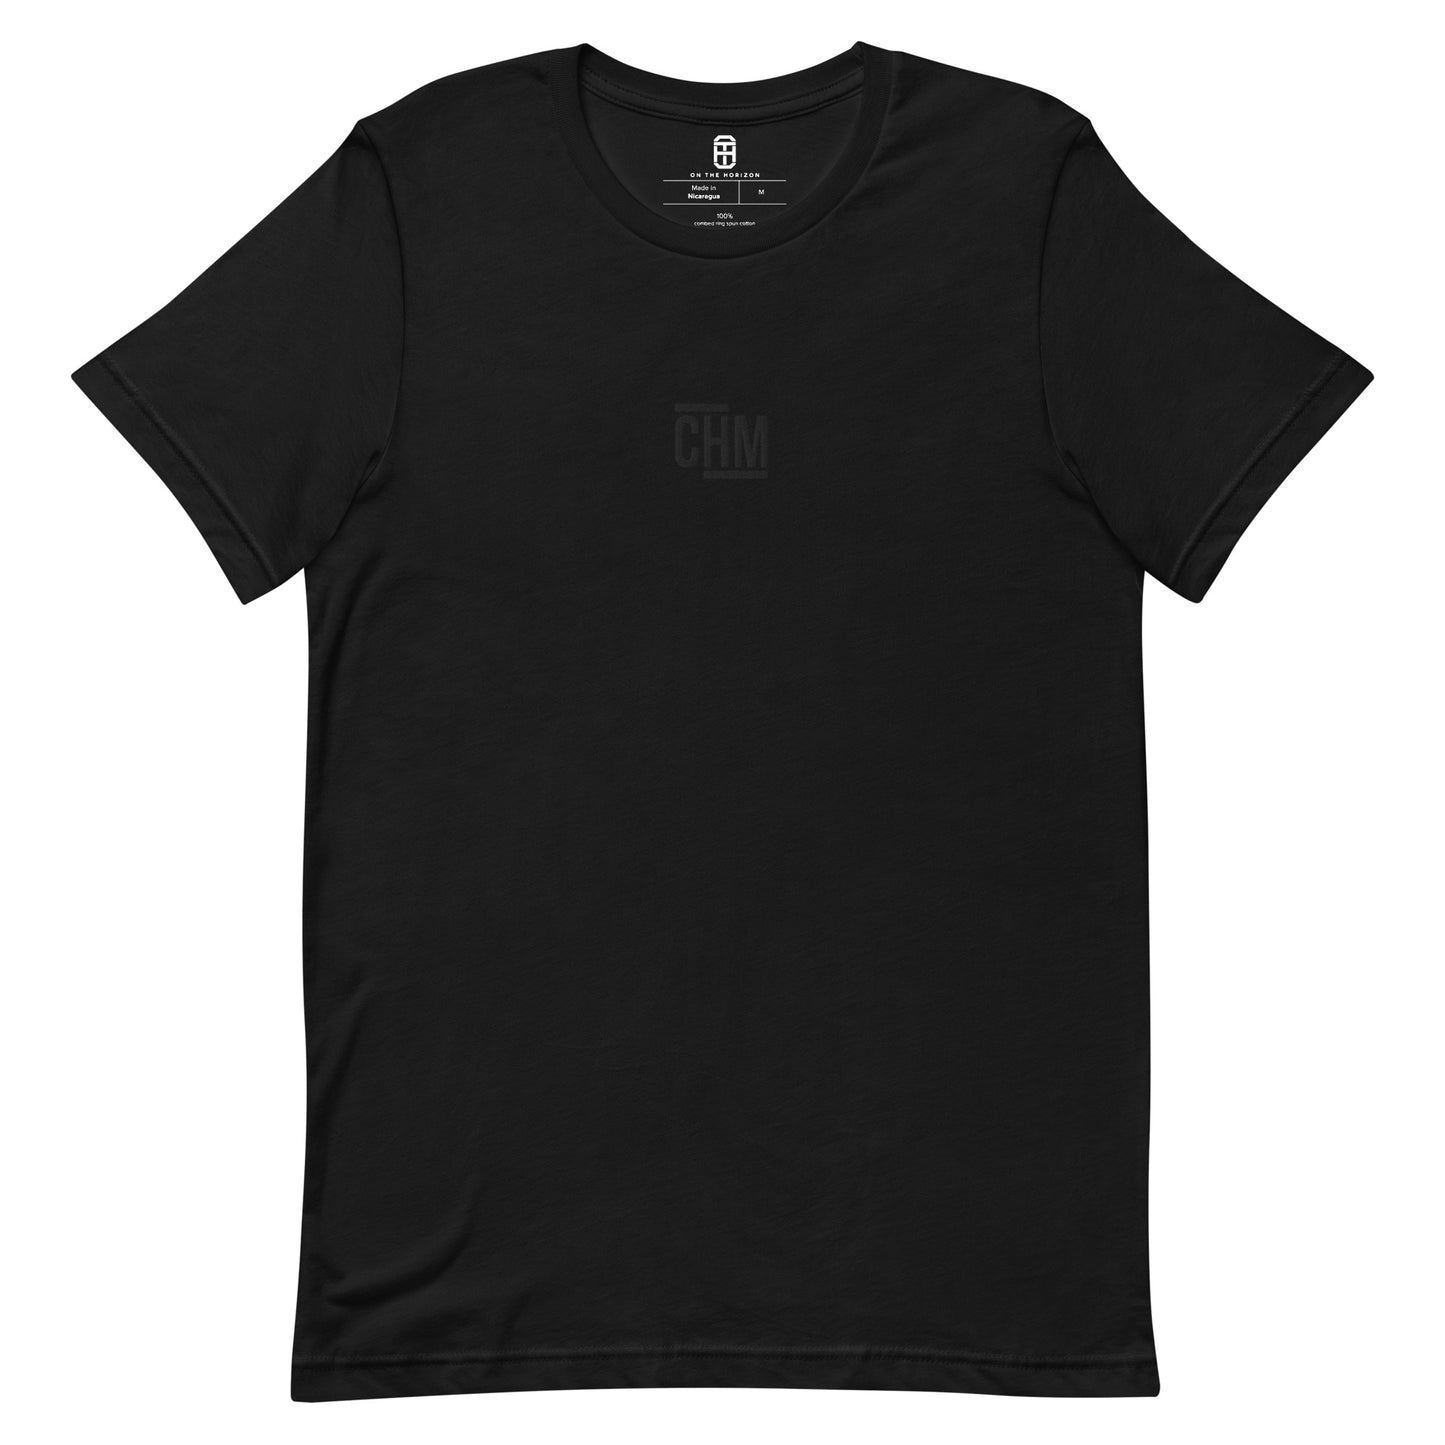 CARING HEARTS BLACK INITIALS EMBROIDERY LOGO T-SHIRT (MORE COLORS)